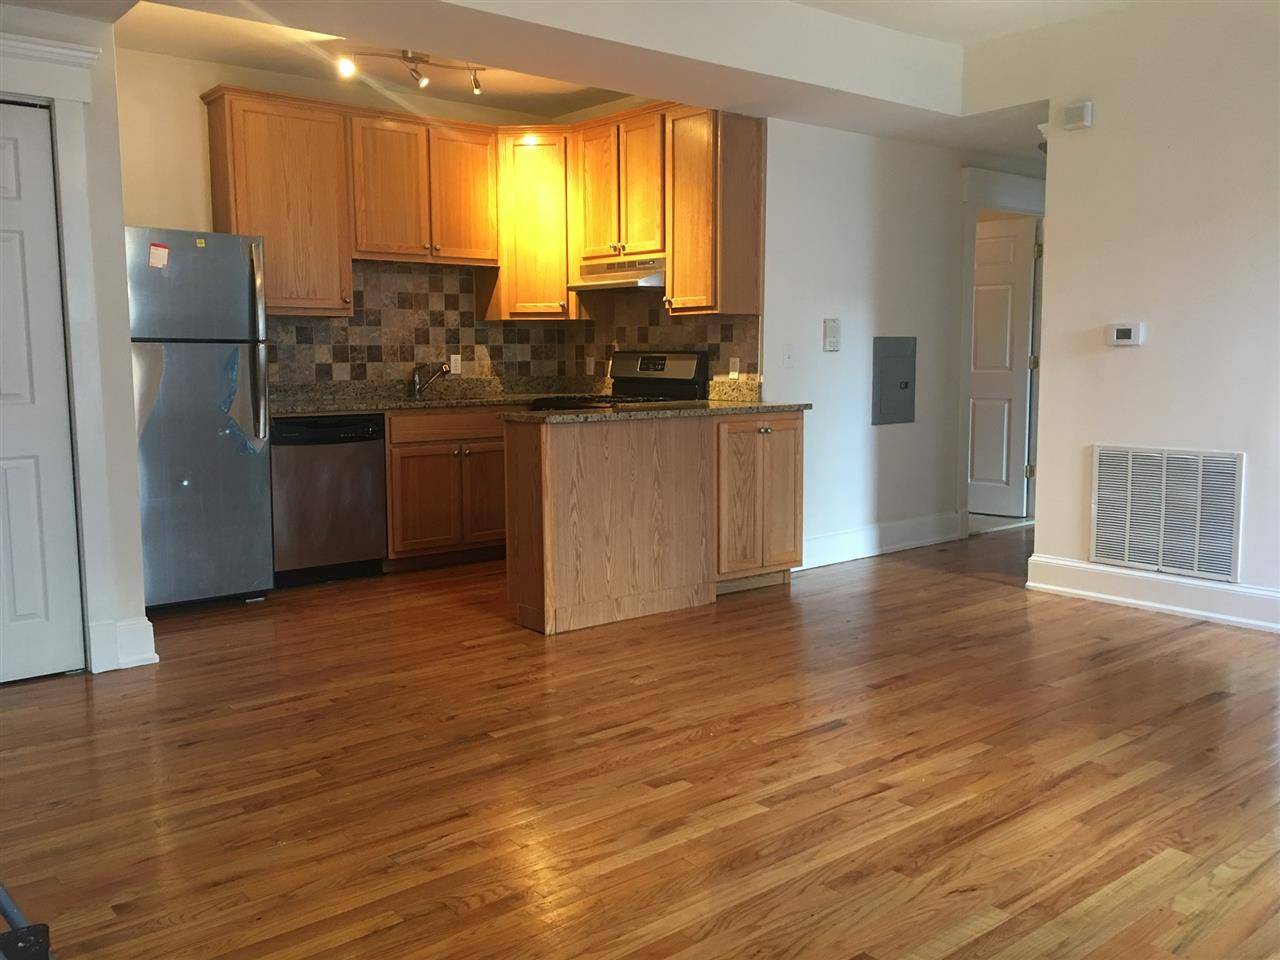 Spacious and bright 2Br/1Ba corner unit conveniently located in the heart of Jersey City